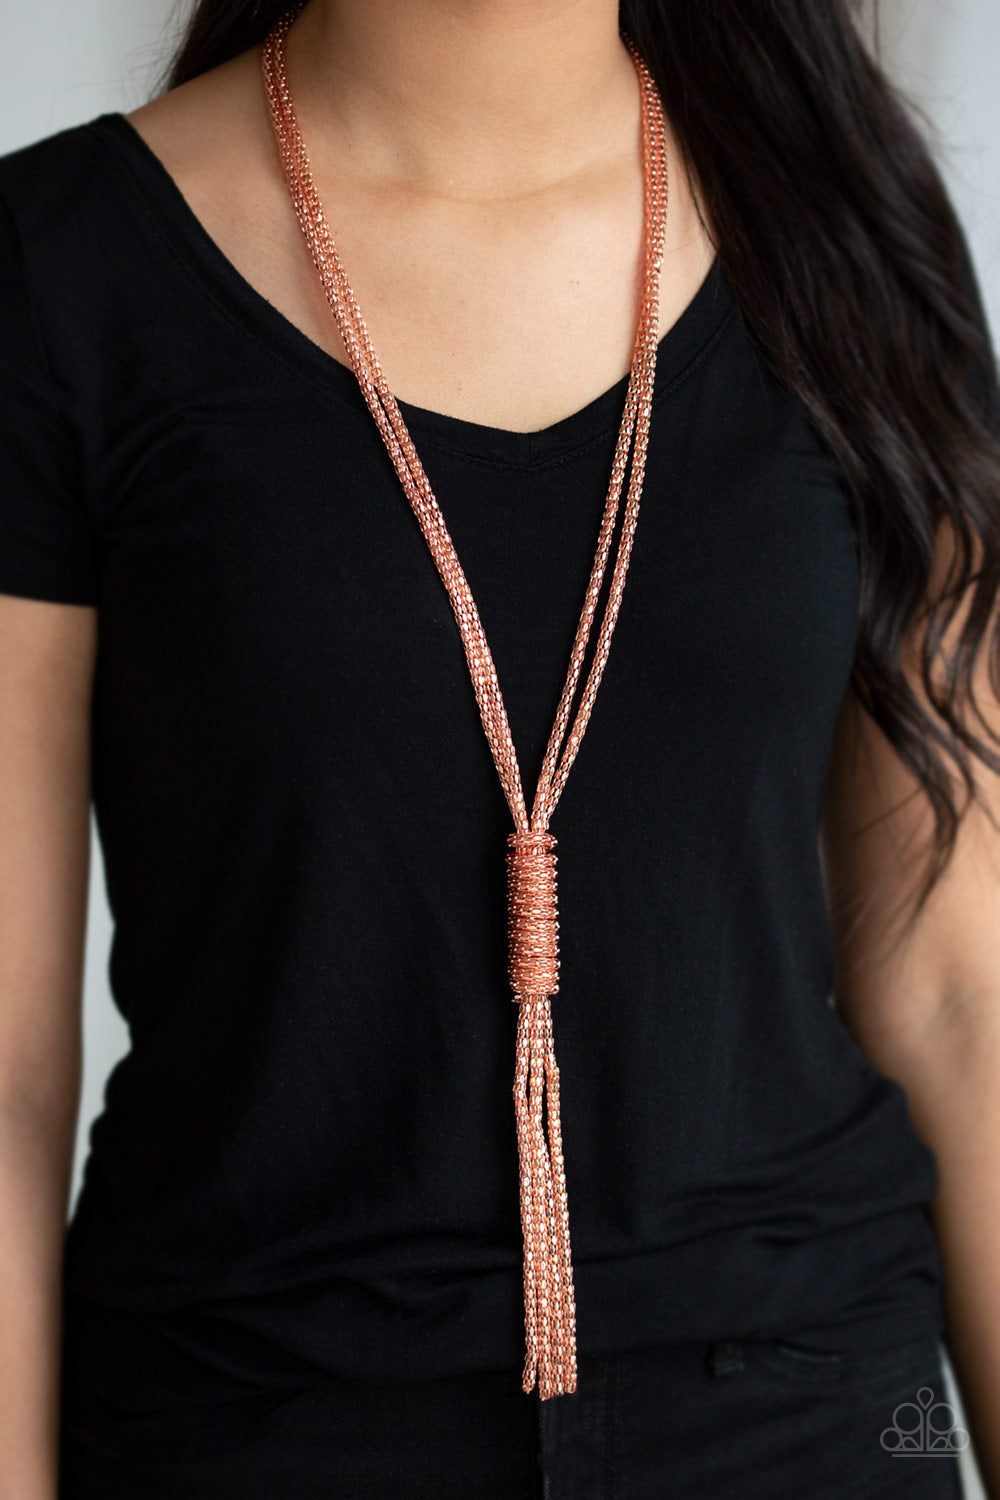 Paparazzi Boom Boom Knock You Out Copper Necklace